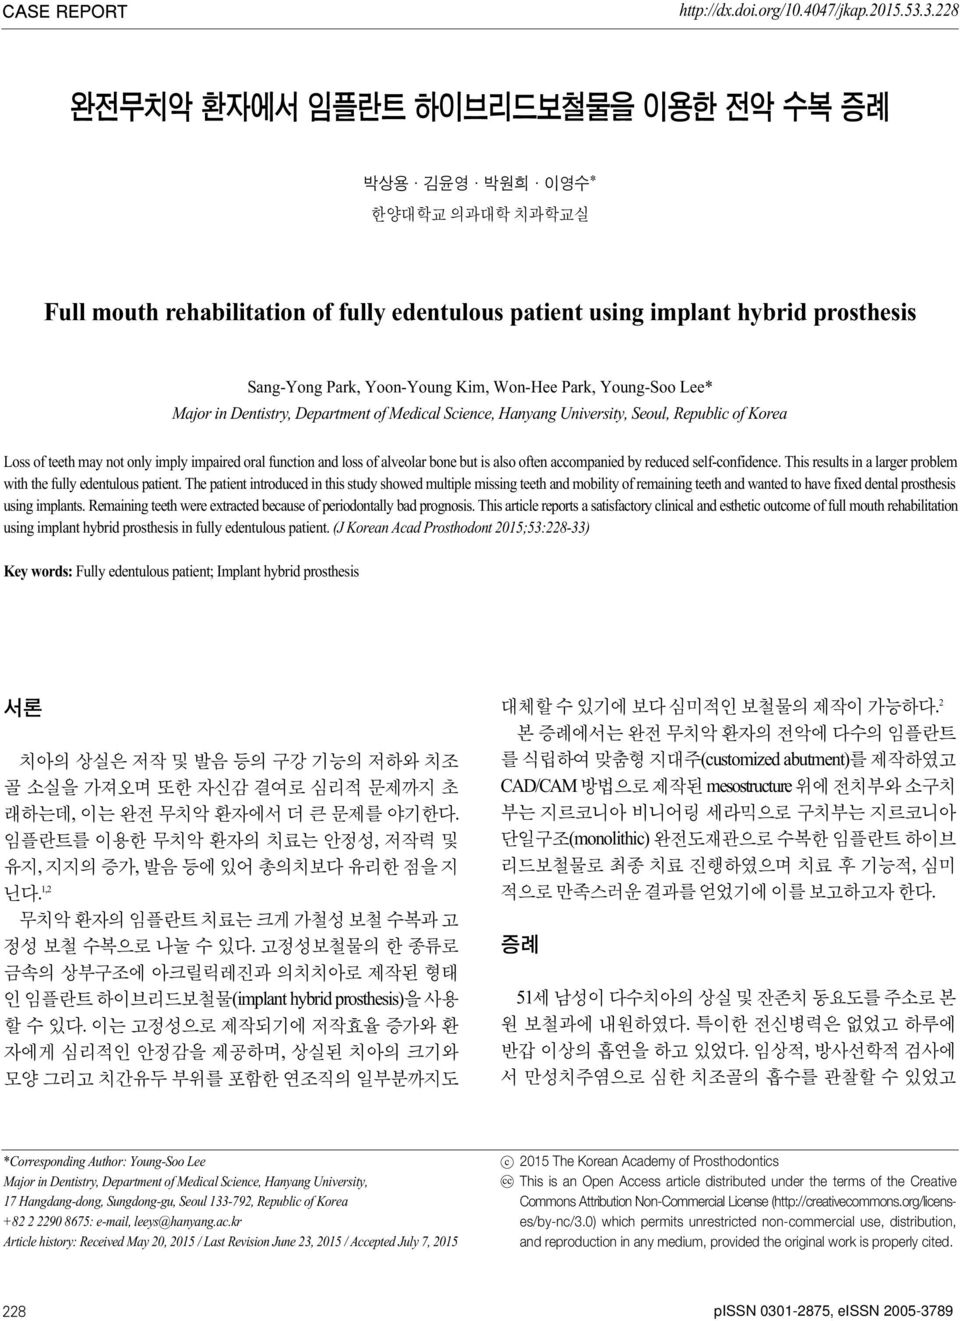 Dentistry, Department of Medical Science, Hanyang University, Seoul, Republic of Korea Loss of teeth may not only imply impaired oral function and loss of alveolar bone but is also often accompanied